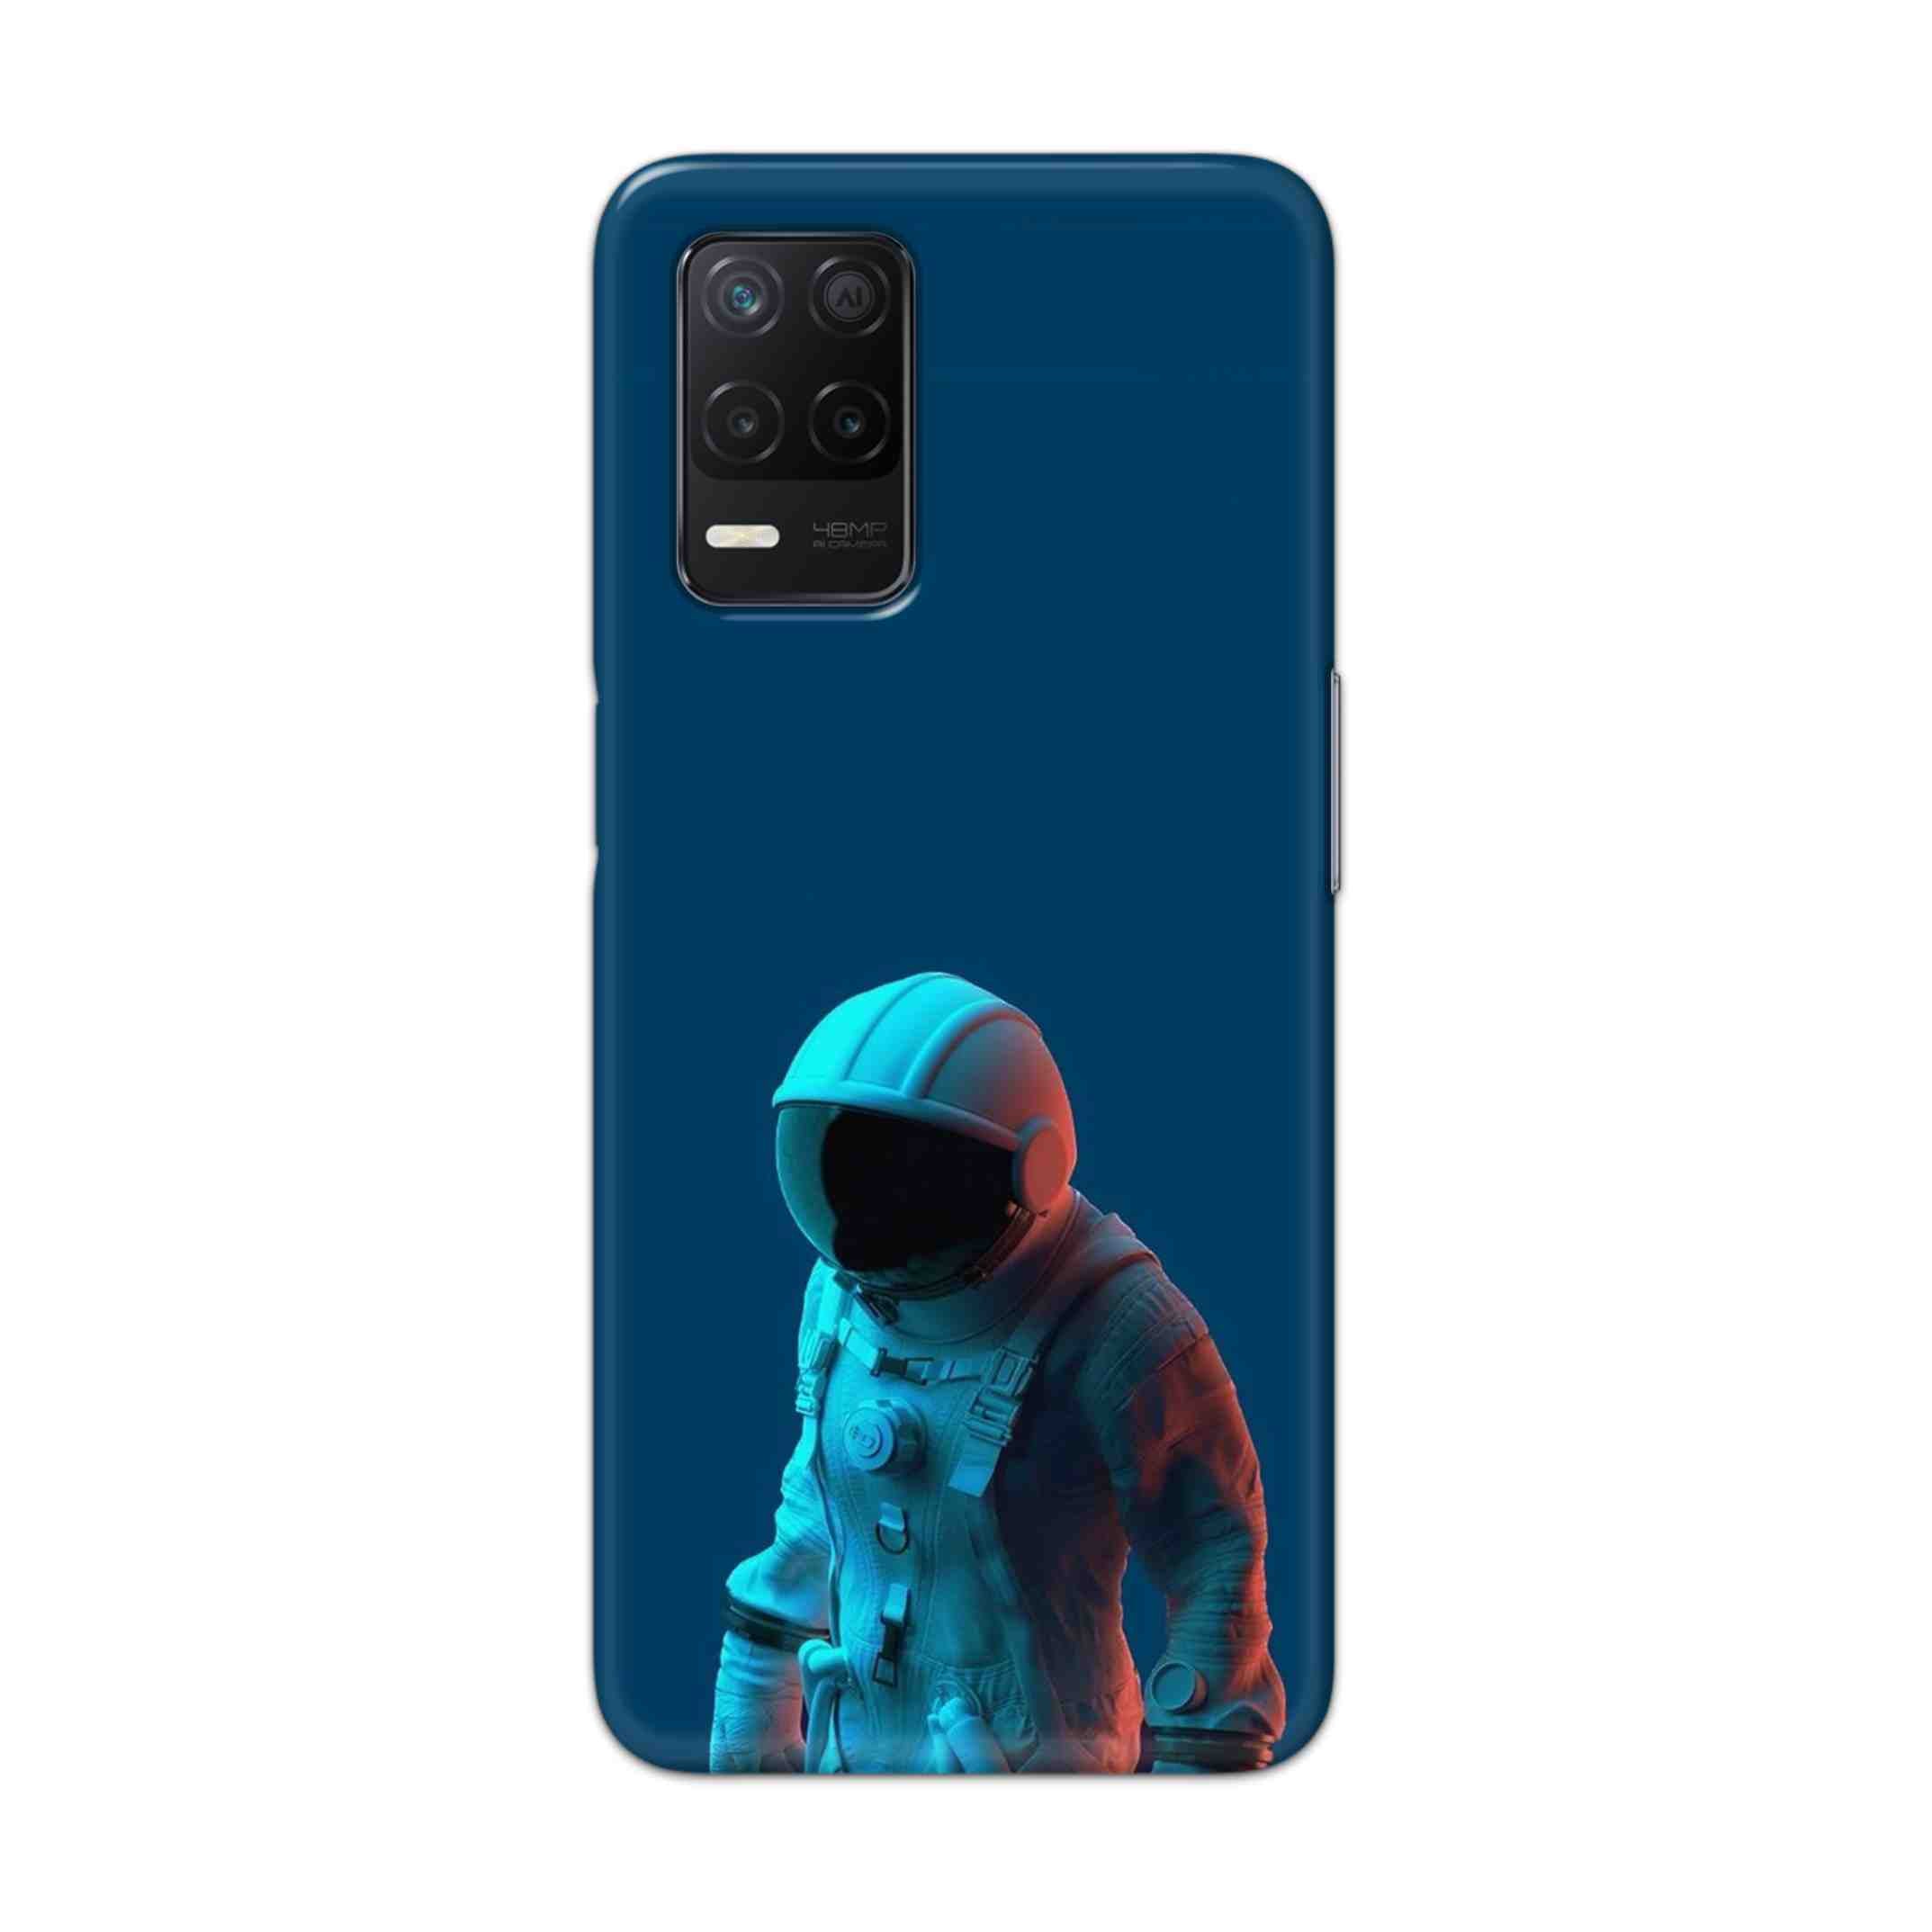 Buy Blue Astronaut Hard Back Mobile Phone Case Cover For Realme Narzo 30 5G Online